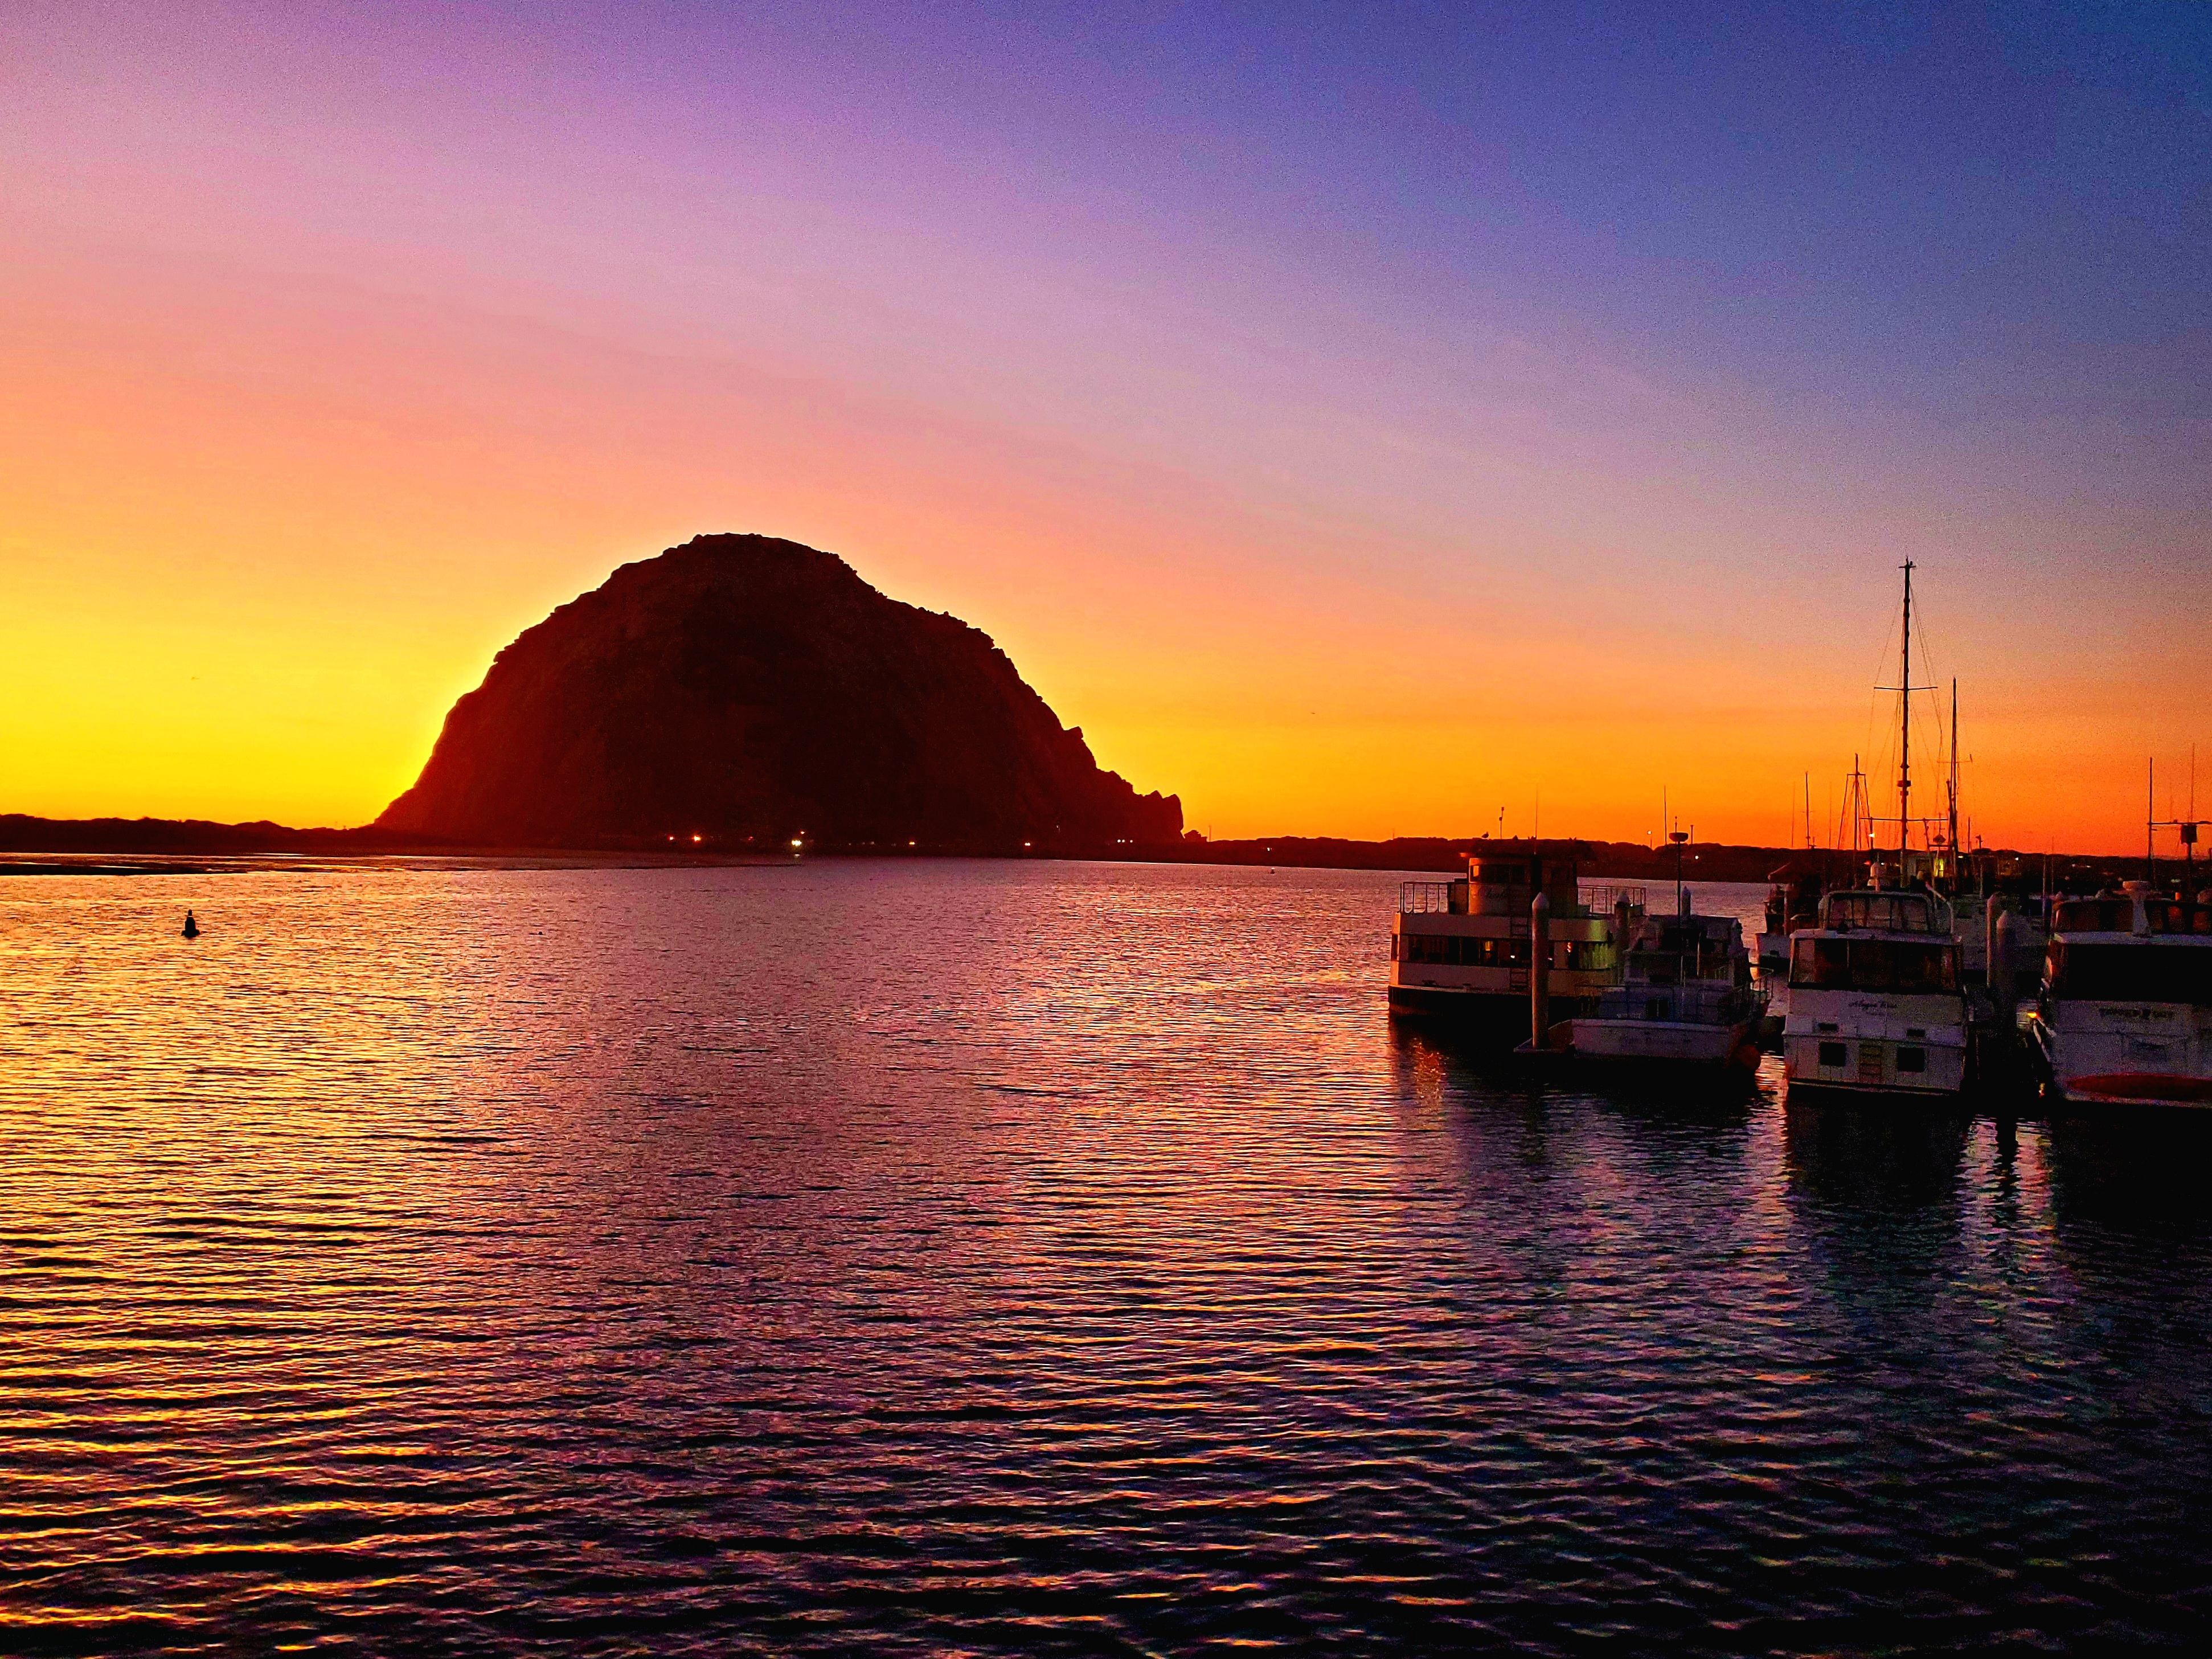 Morro Bay at Sunset, taken without any view of the stacks. 